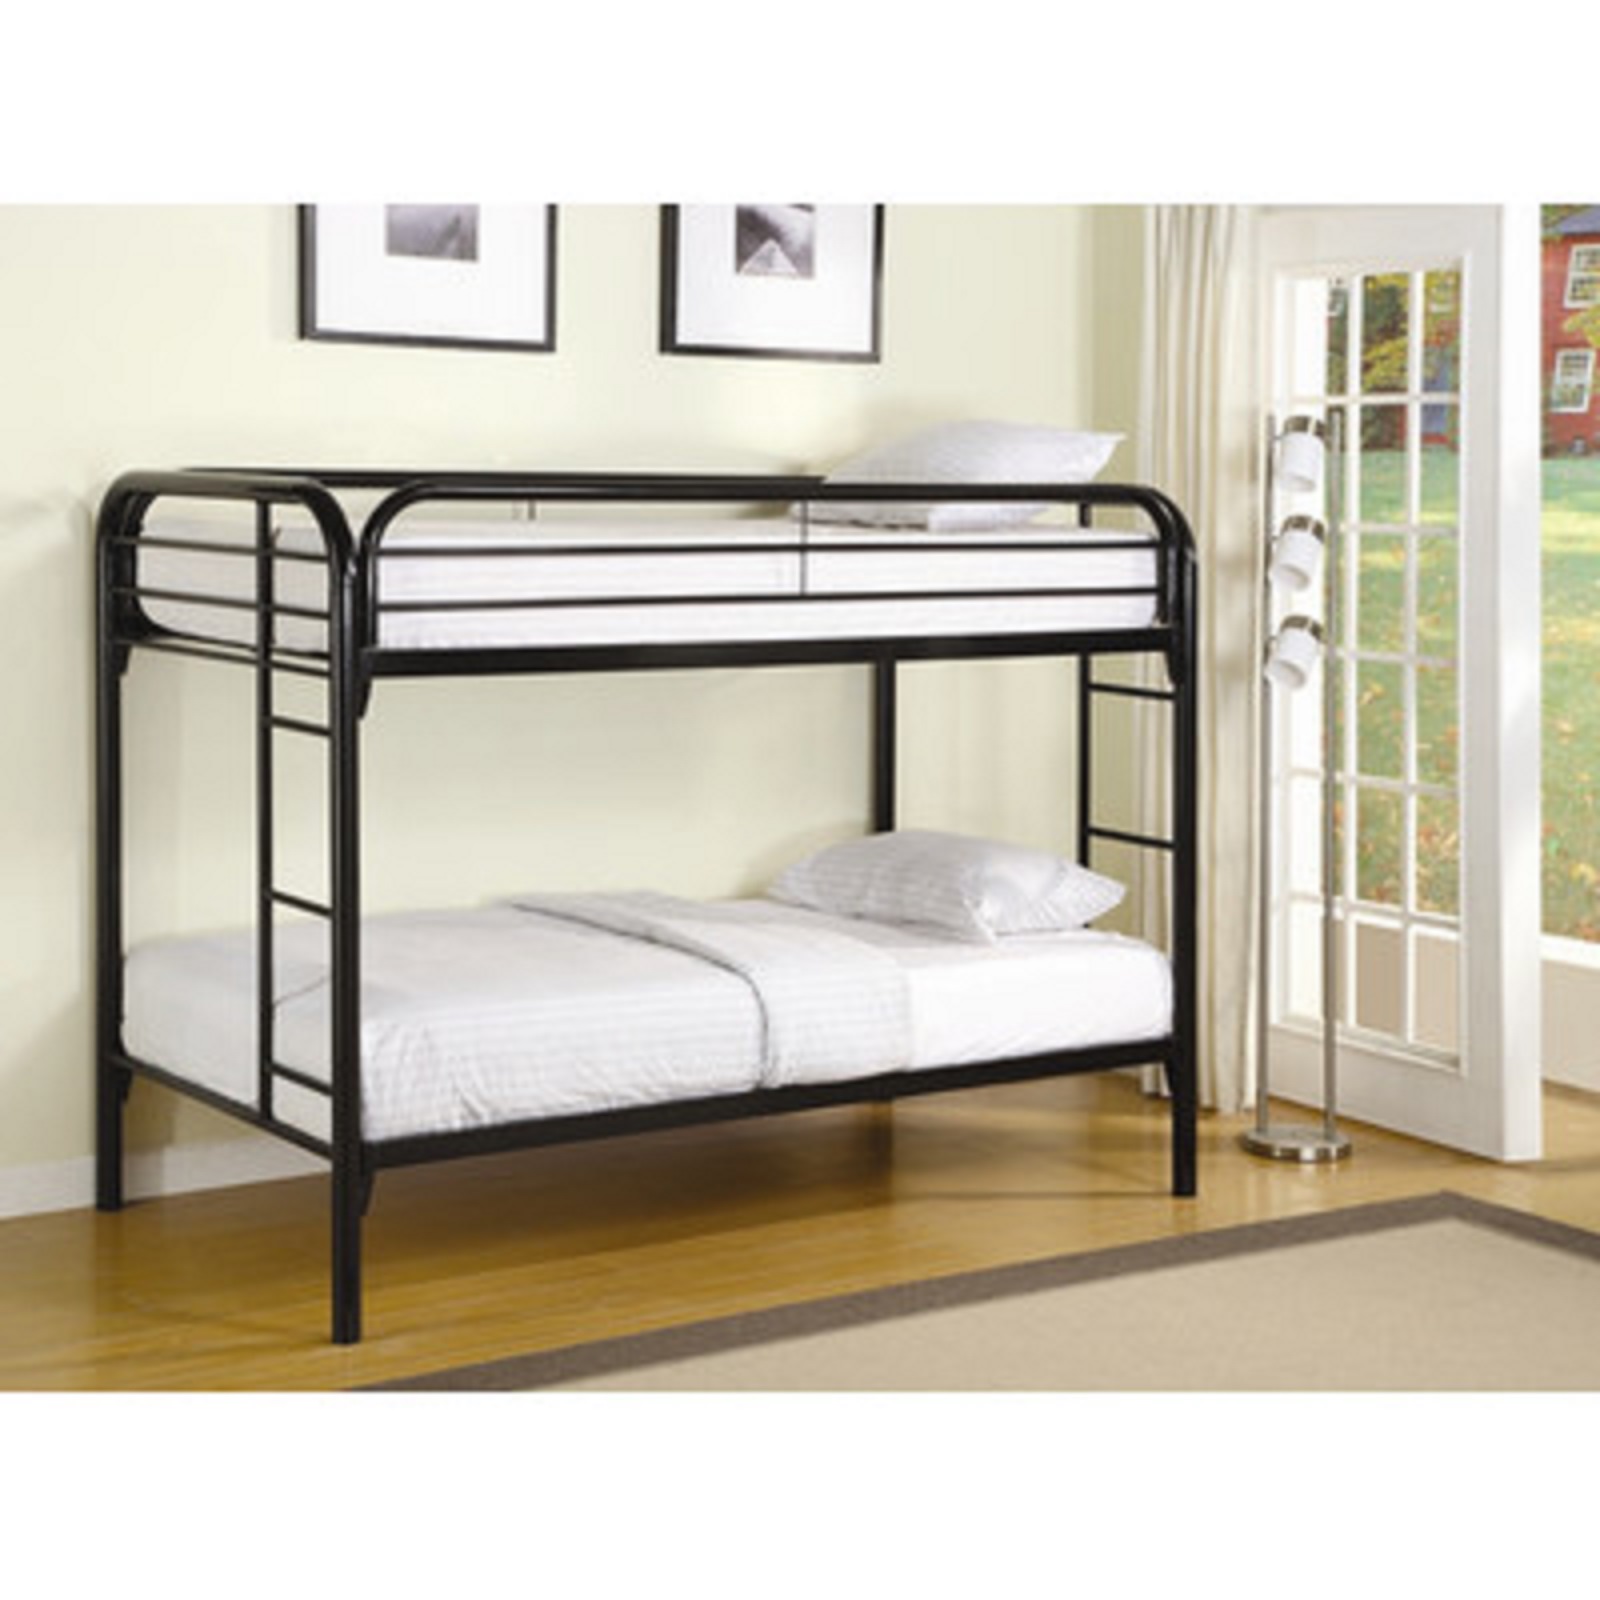 sears bunk beds